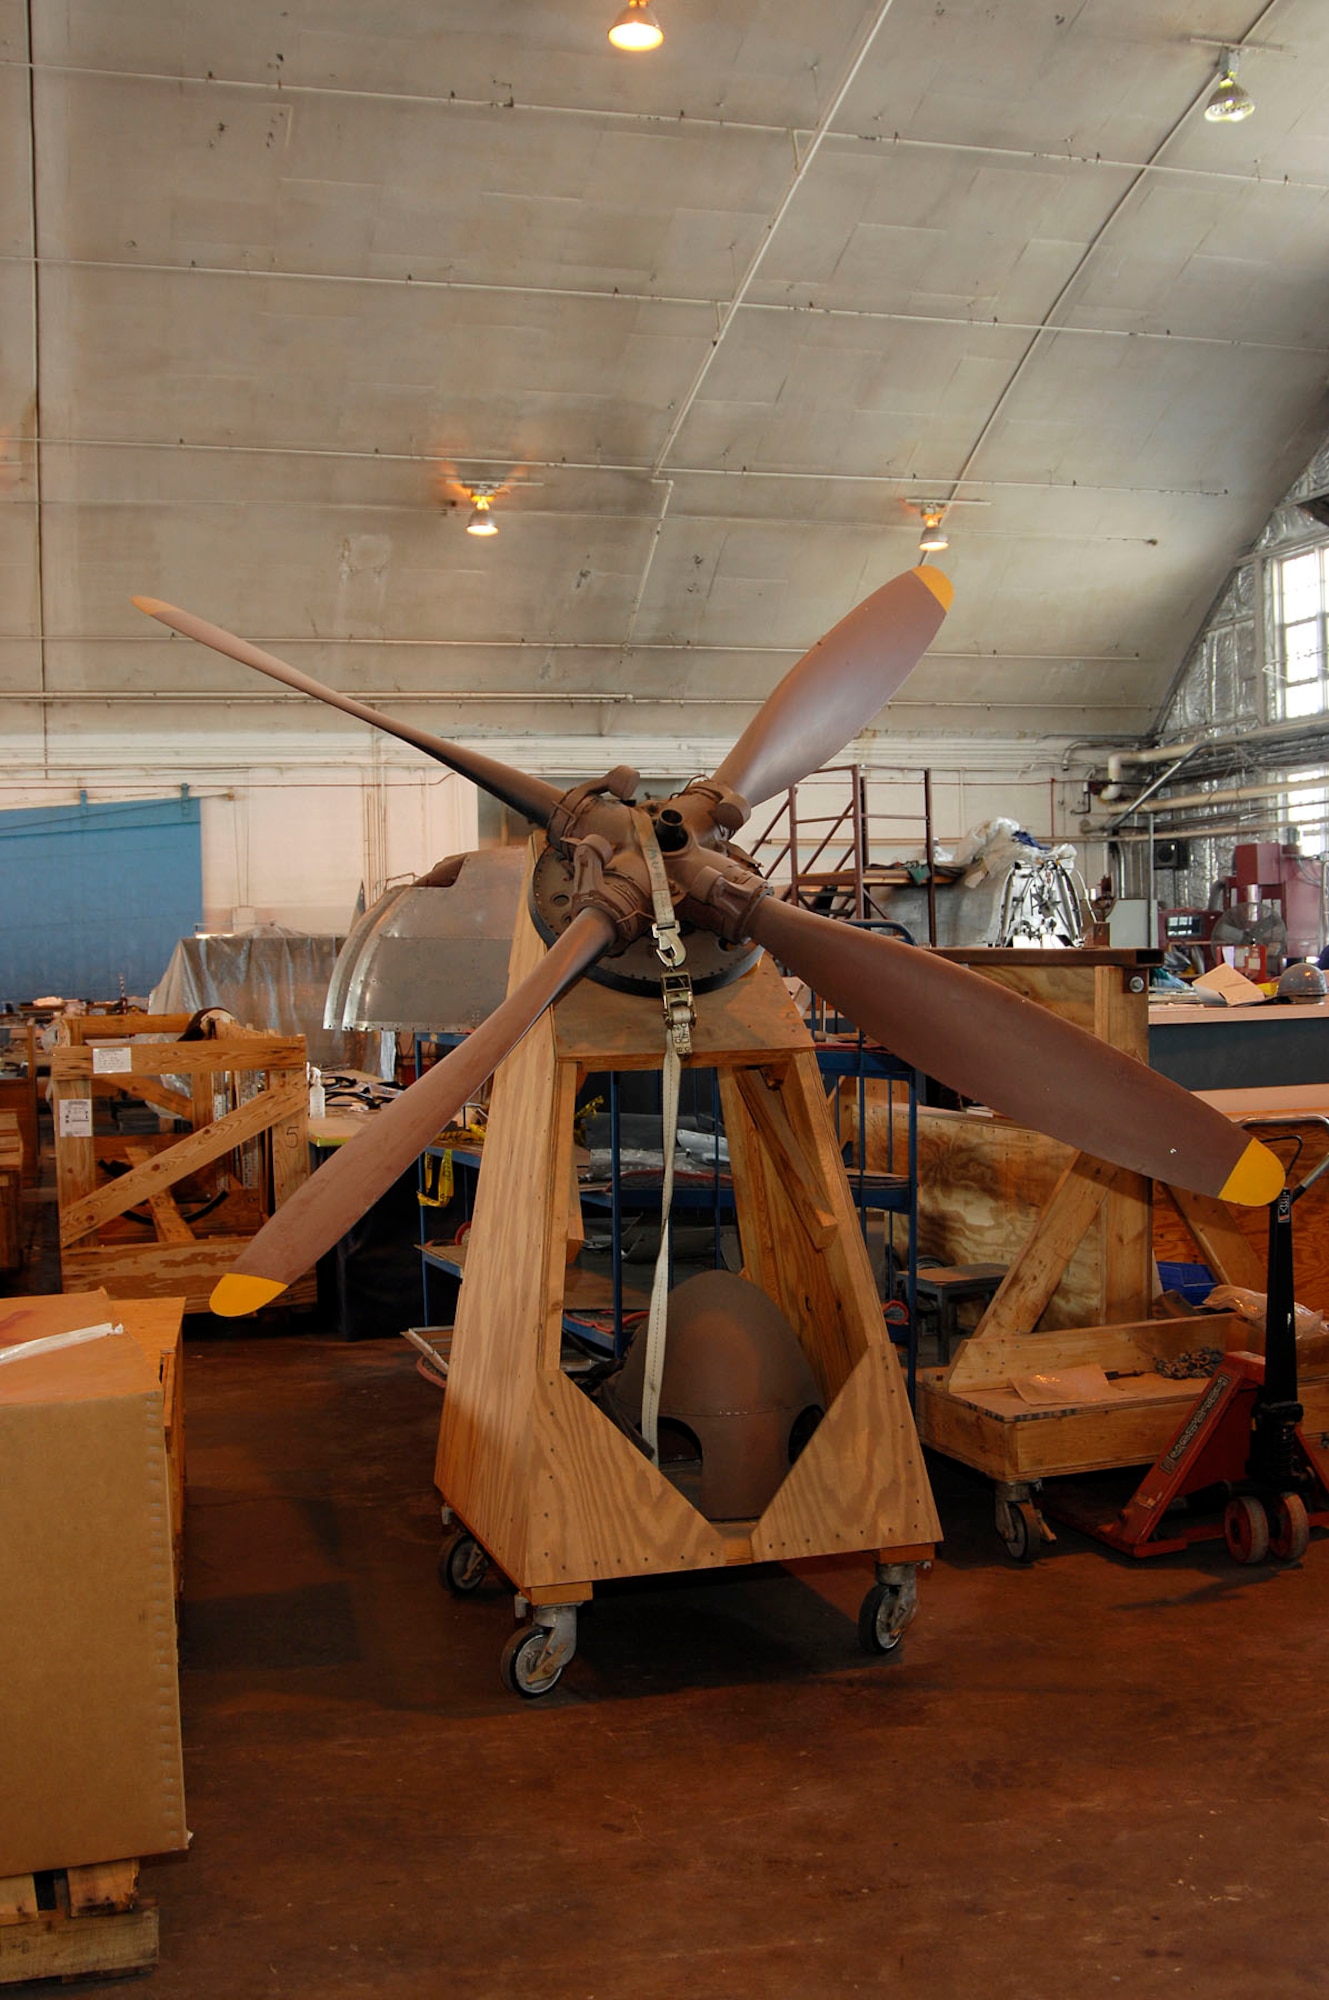 DAYTON, Ohio (02/2007) -- Propeller for the Japanese George in restoration at the National Museum of the U.S. Air Force. (U.S. Air Force photo)